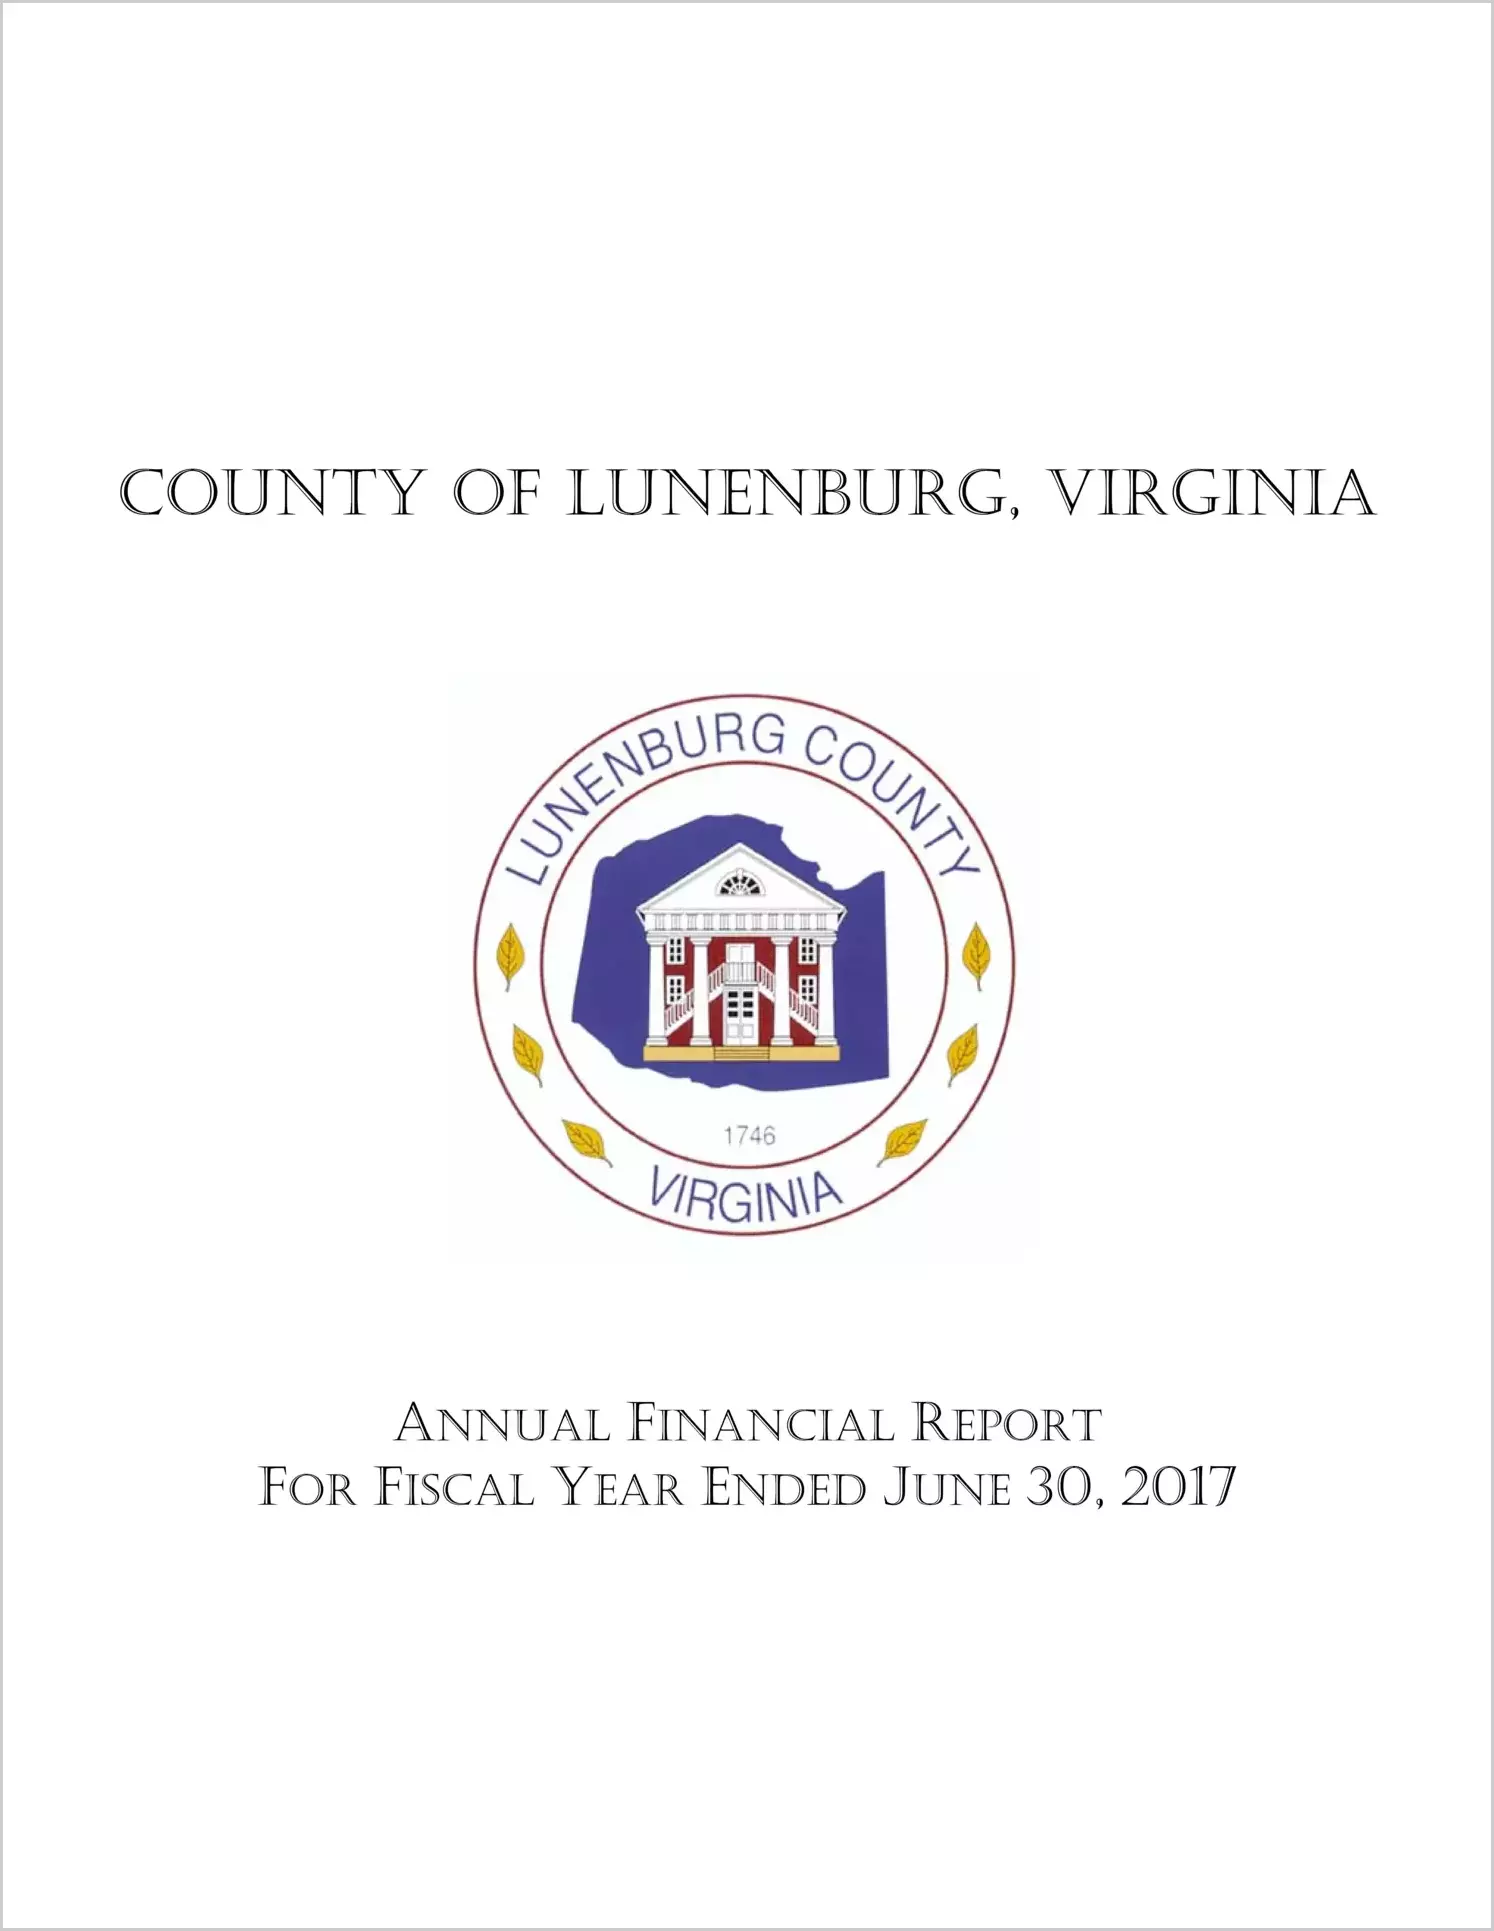 2017 Annual Financial Report for County of Lunenburg